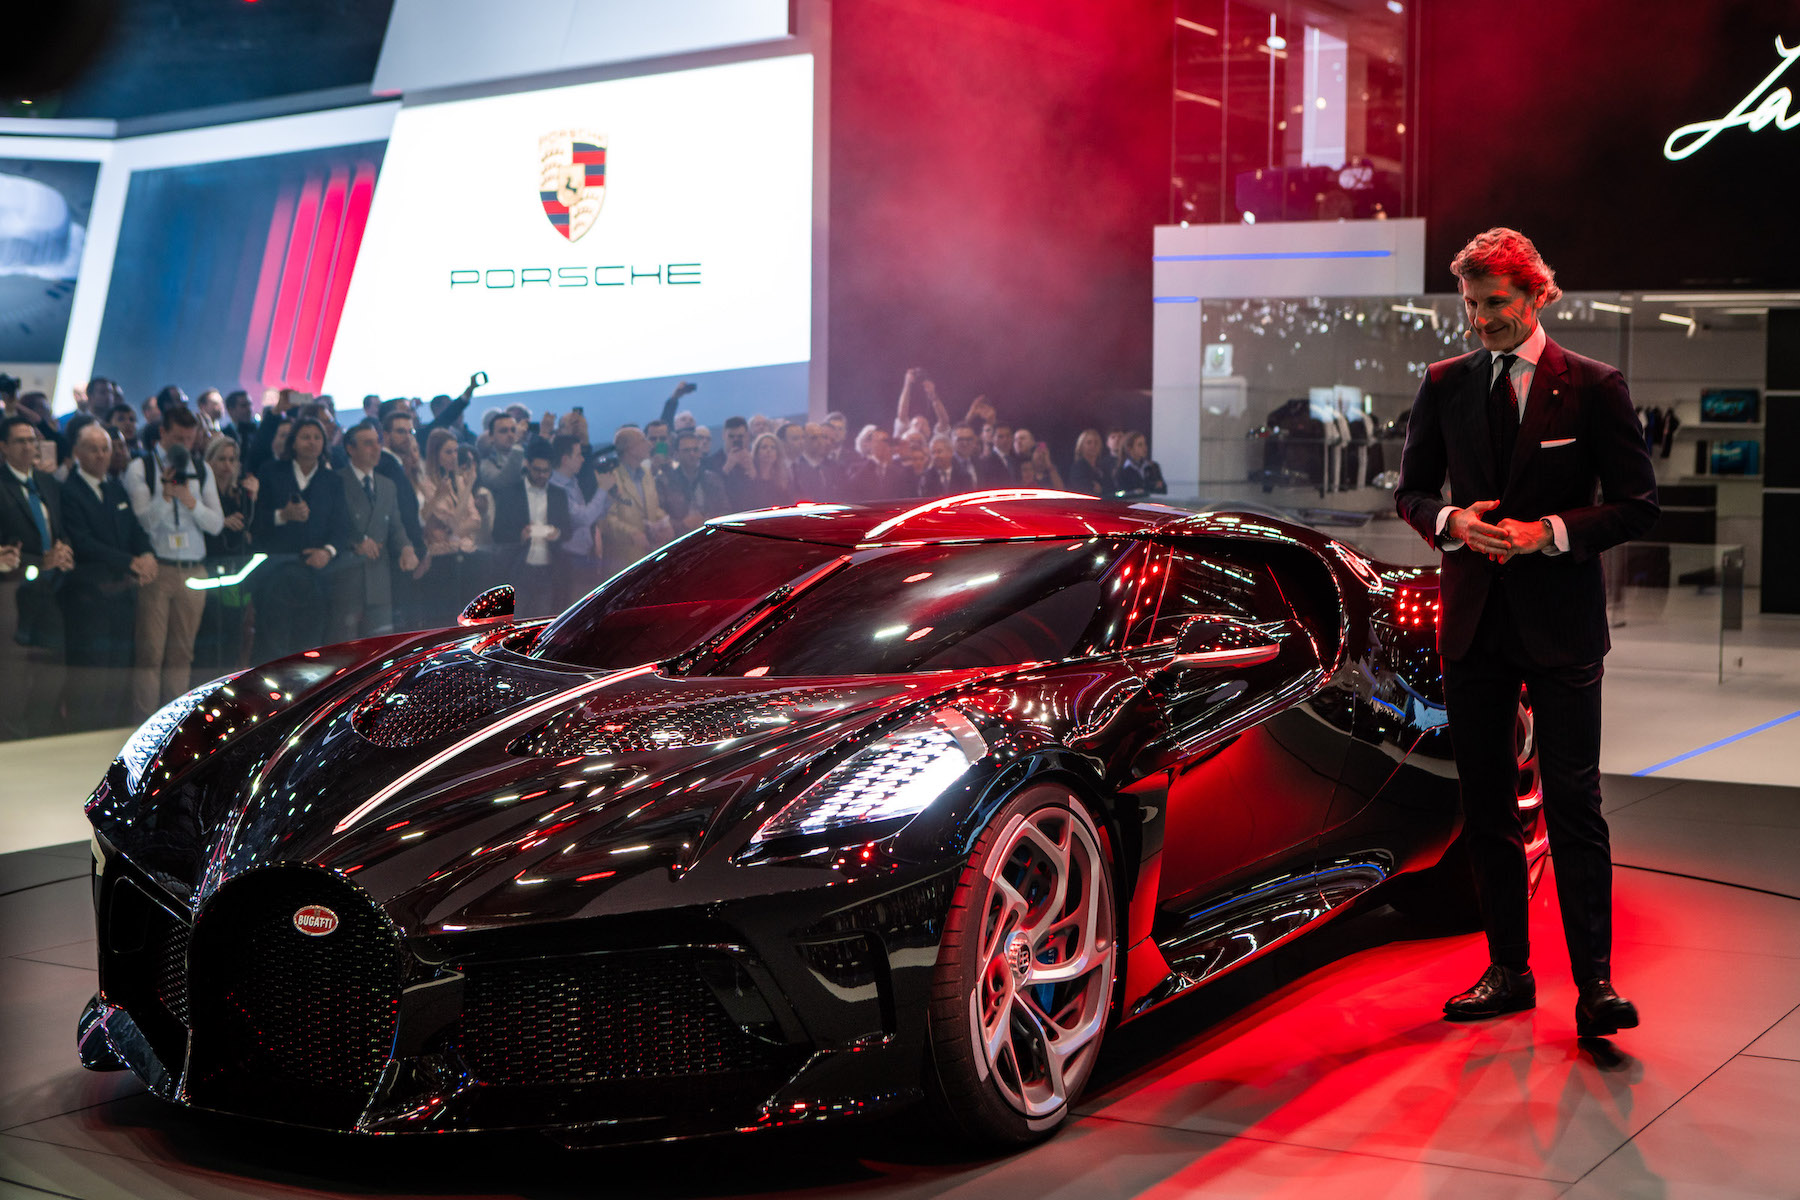 This $19 million Bugatti is the most expensive new car ever sold